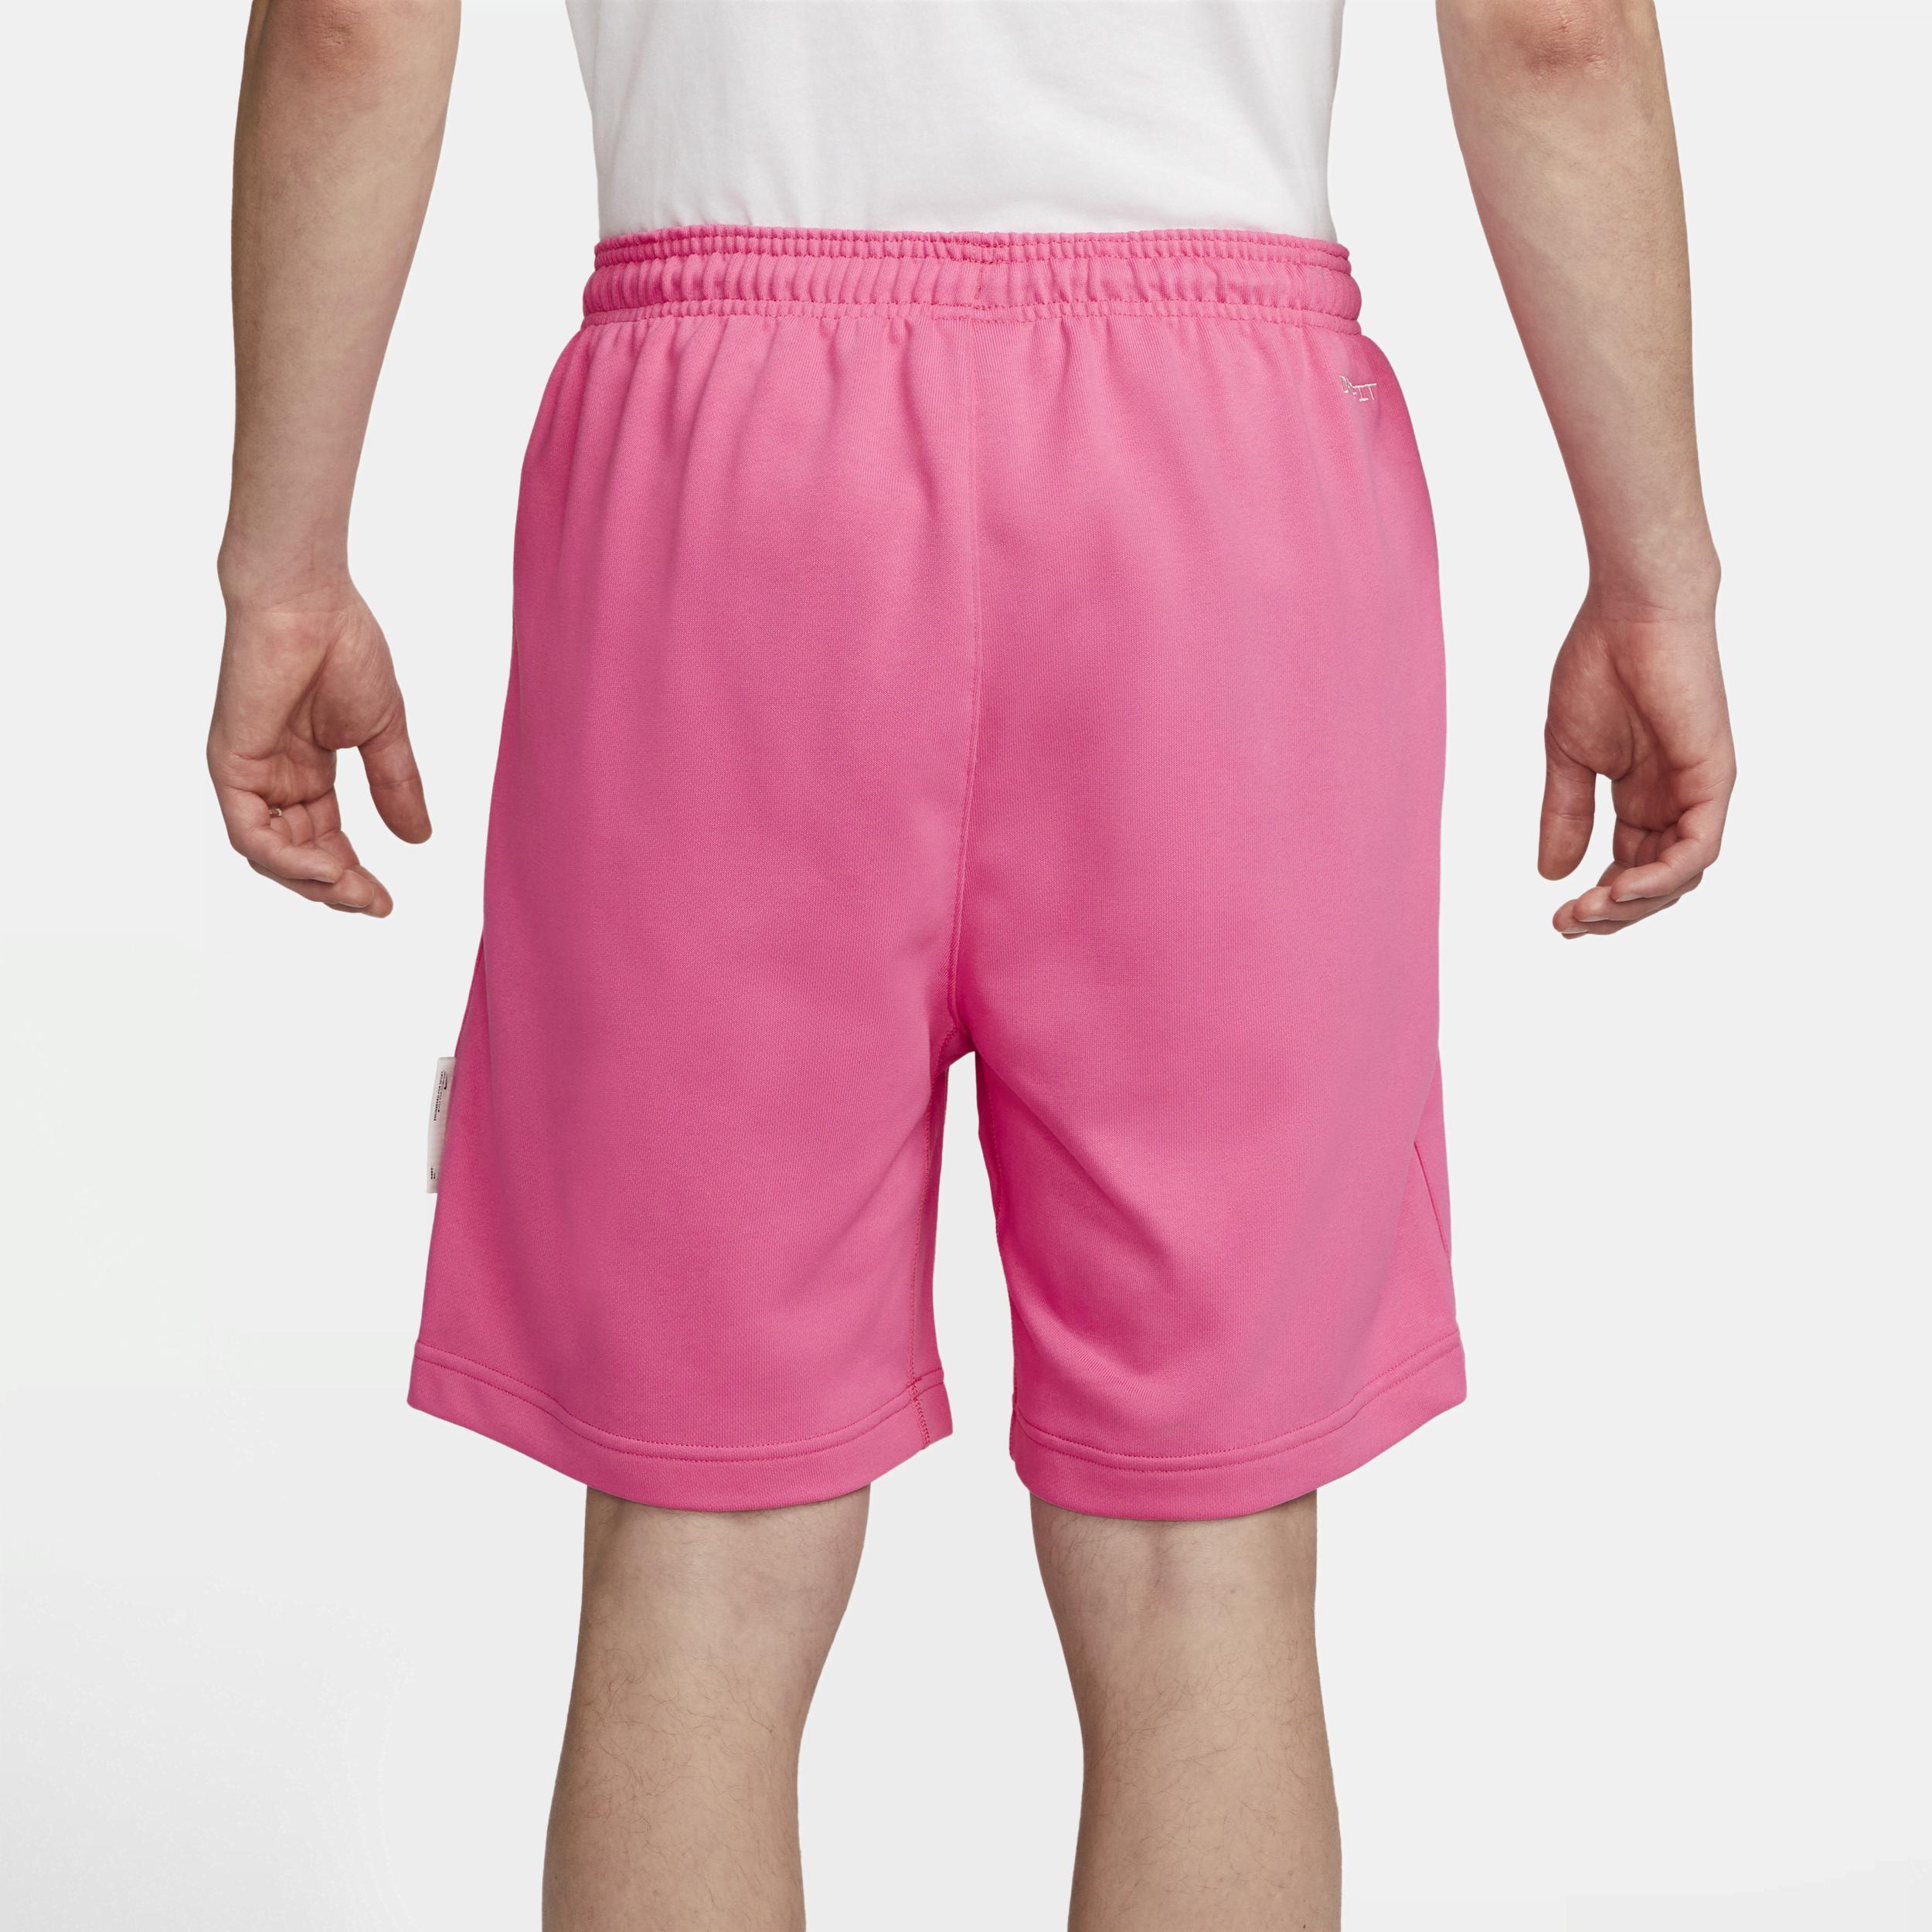 Nike Standard Issue Dri-fit 8" Basketball Shorts In Pink, for Men | Lyst